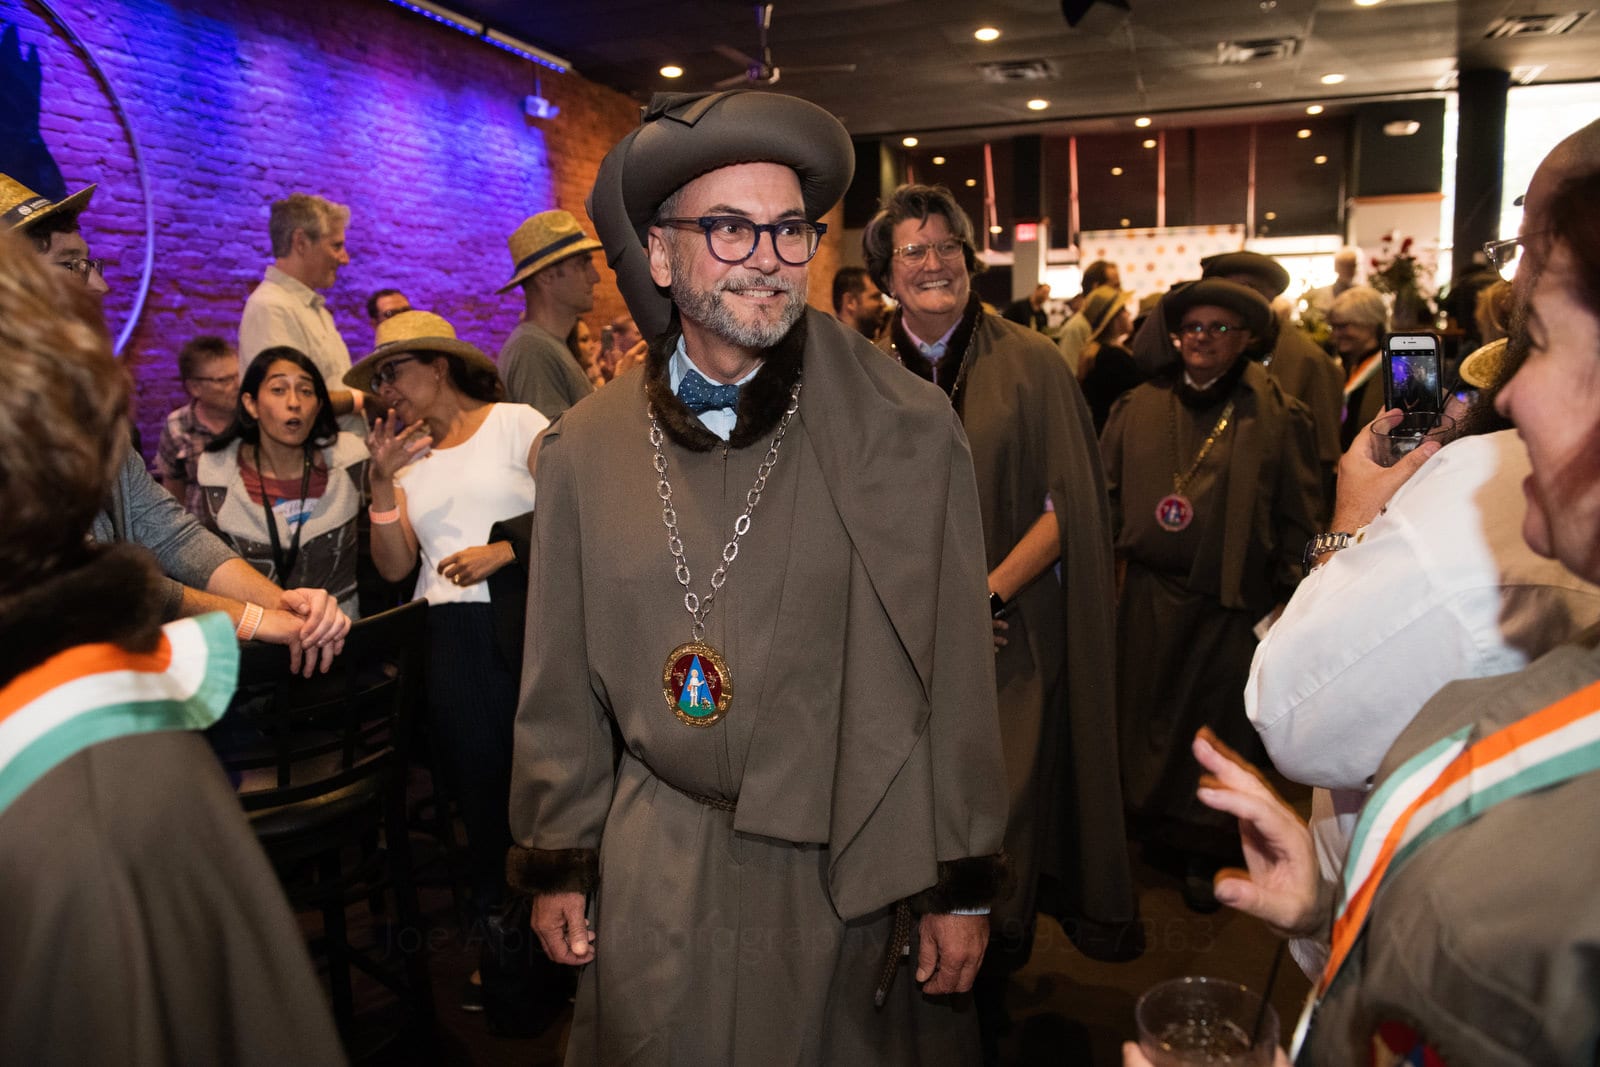 A smiling man wears a brown robe and a hat shaped like a wheel of cheese during a ceremony Pittsburgh editorial event photographer.